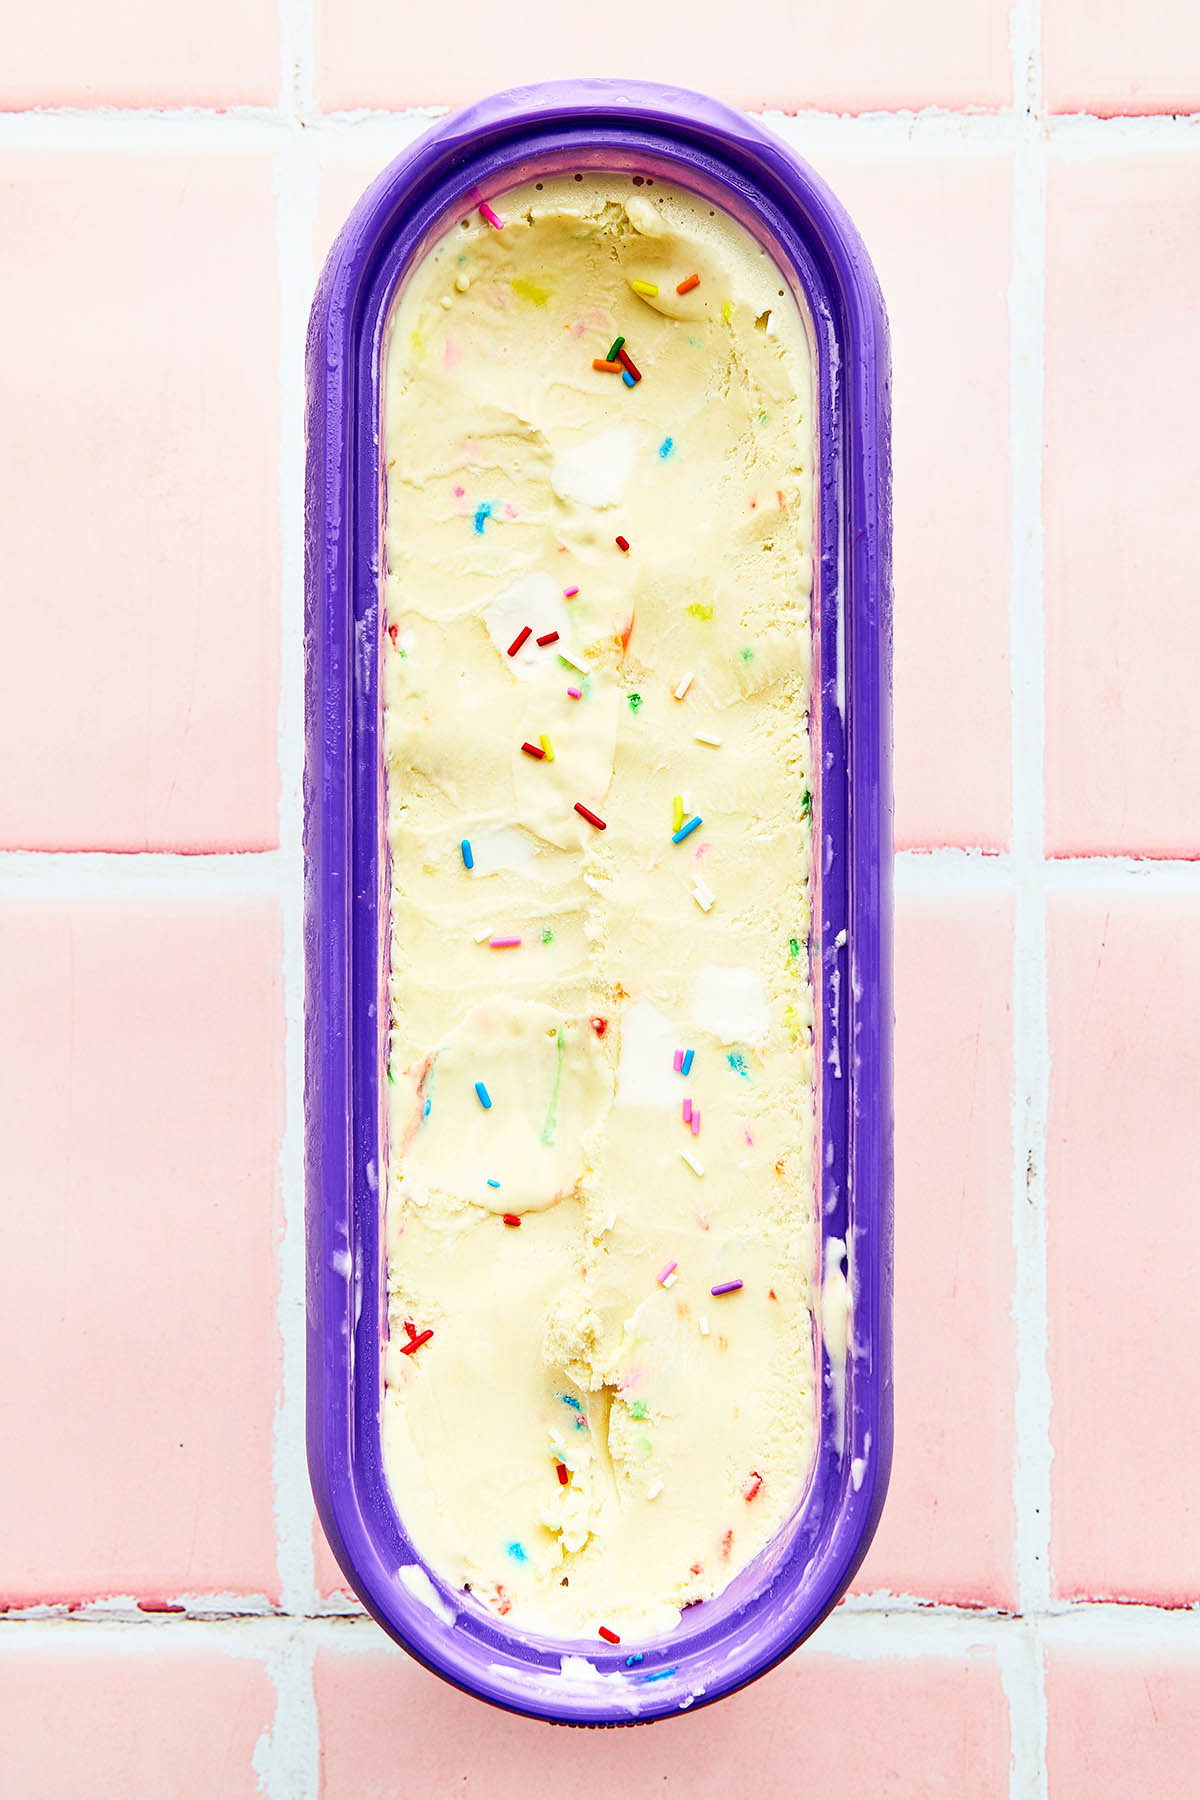 An oblong purple insulated ice cream tub filled with birthday cake ice cream.